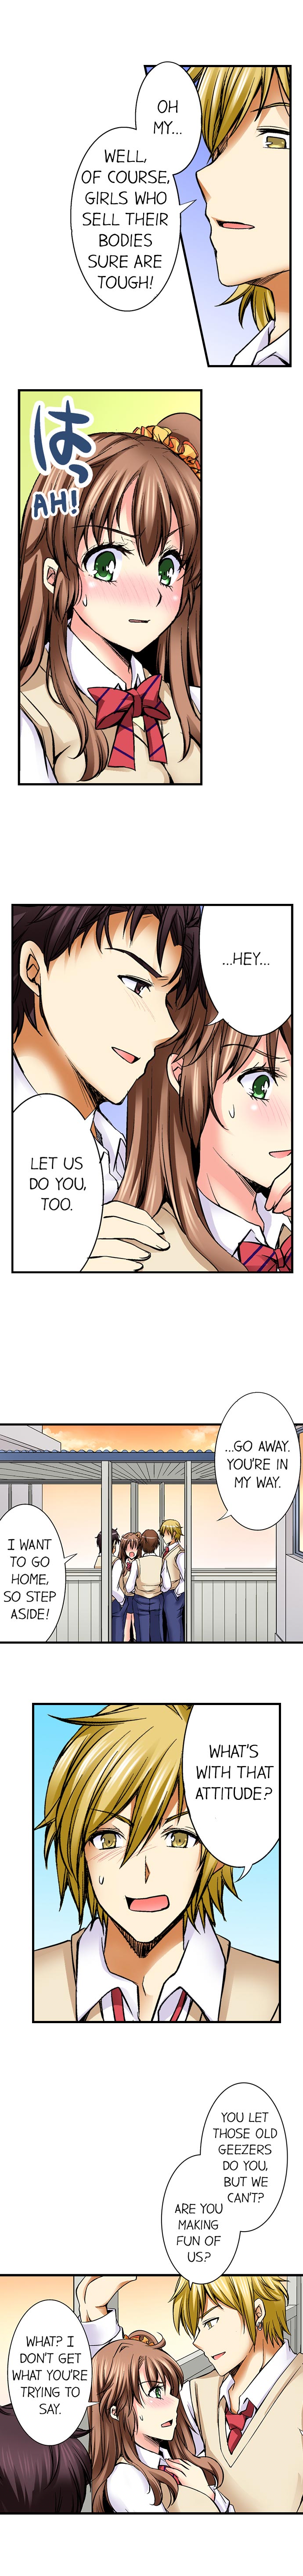 Why Can't i Have Sex With My Teacher? - Chapter 7 Page 5